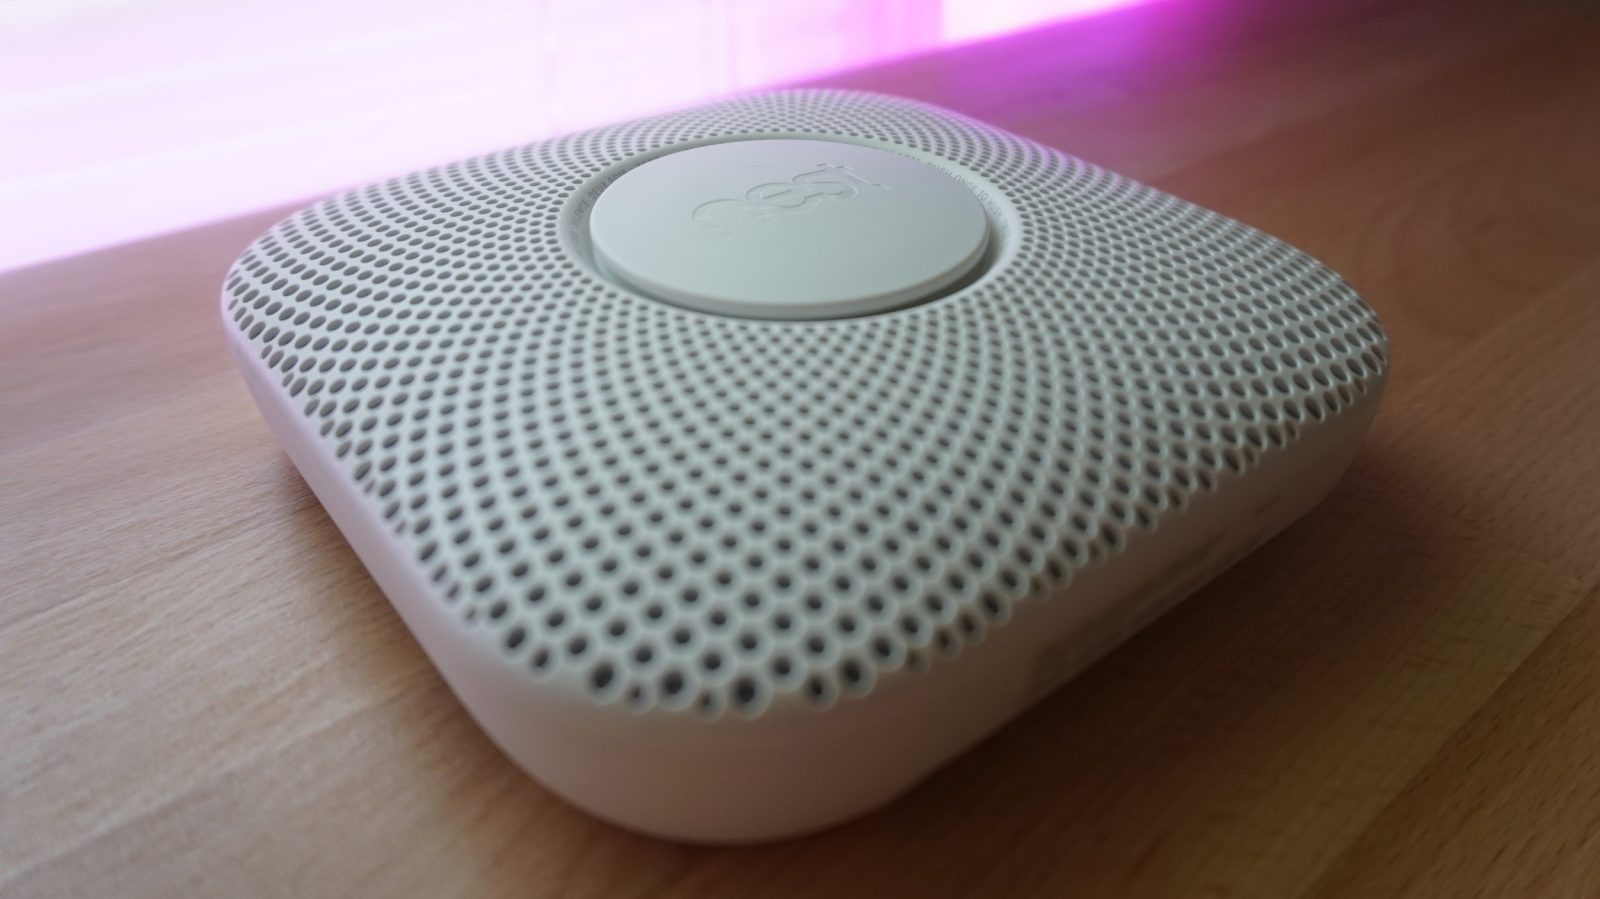 Nest Protect 2 review